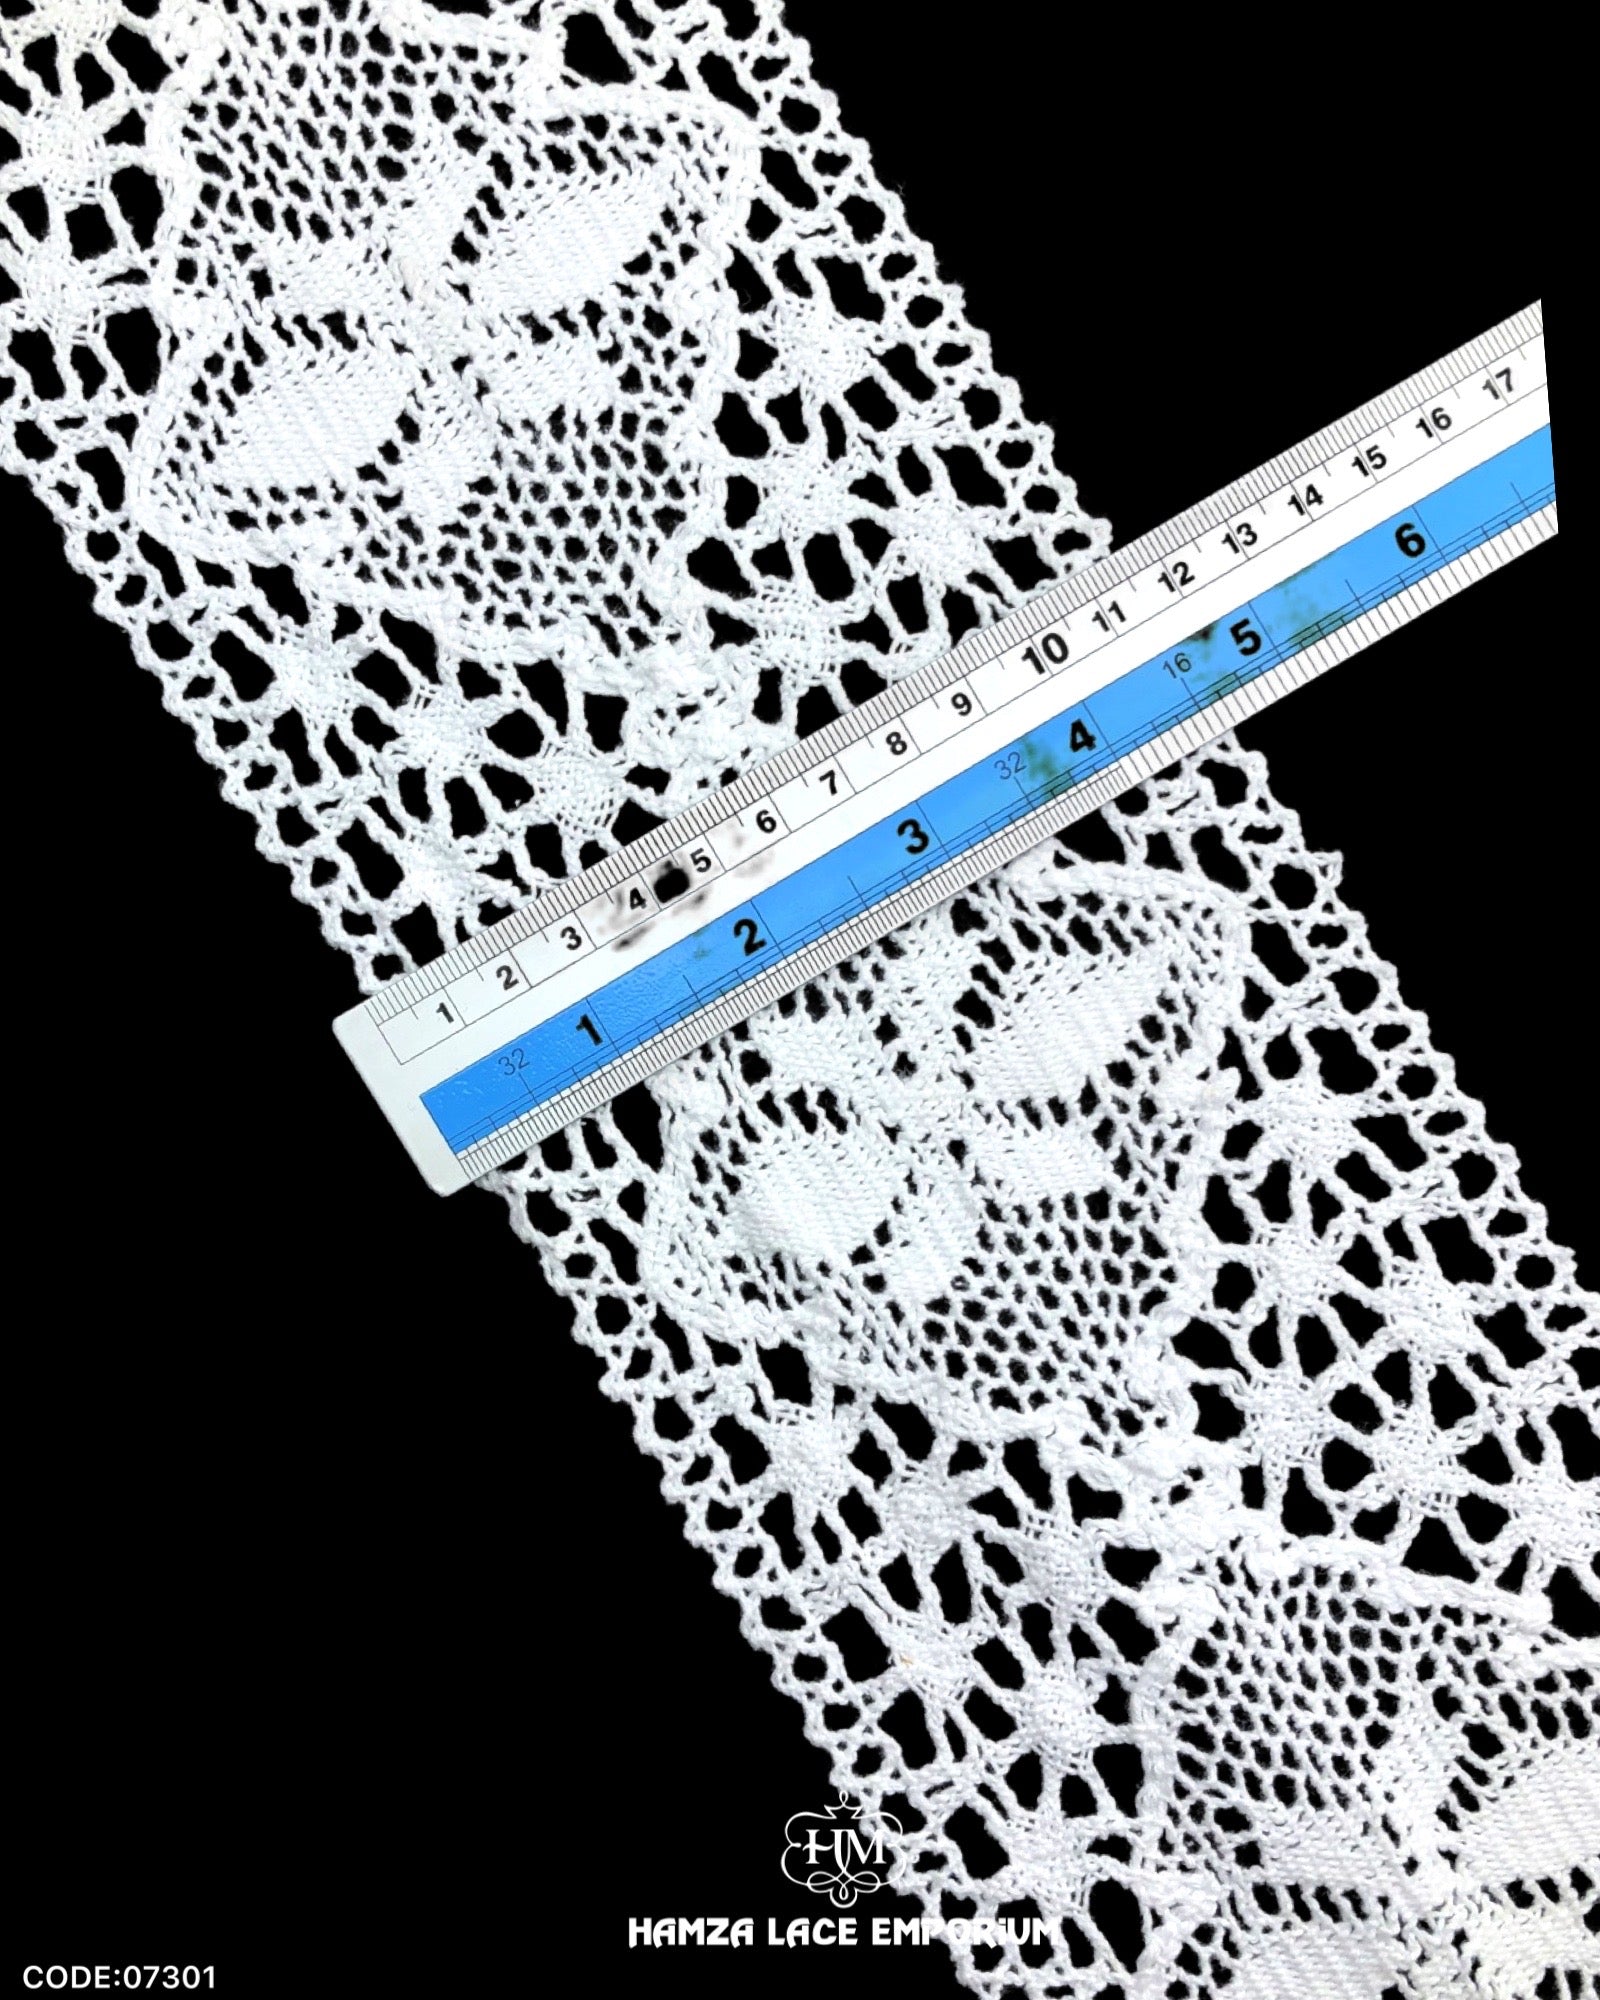 Size of the 'Center Filling Crochet Lace 07301' is shown with the help of a ruler as '3' inches